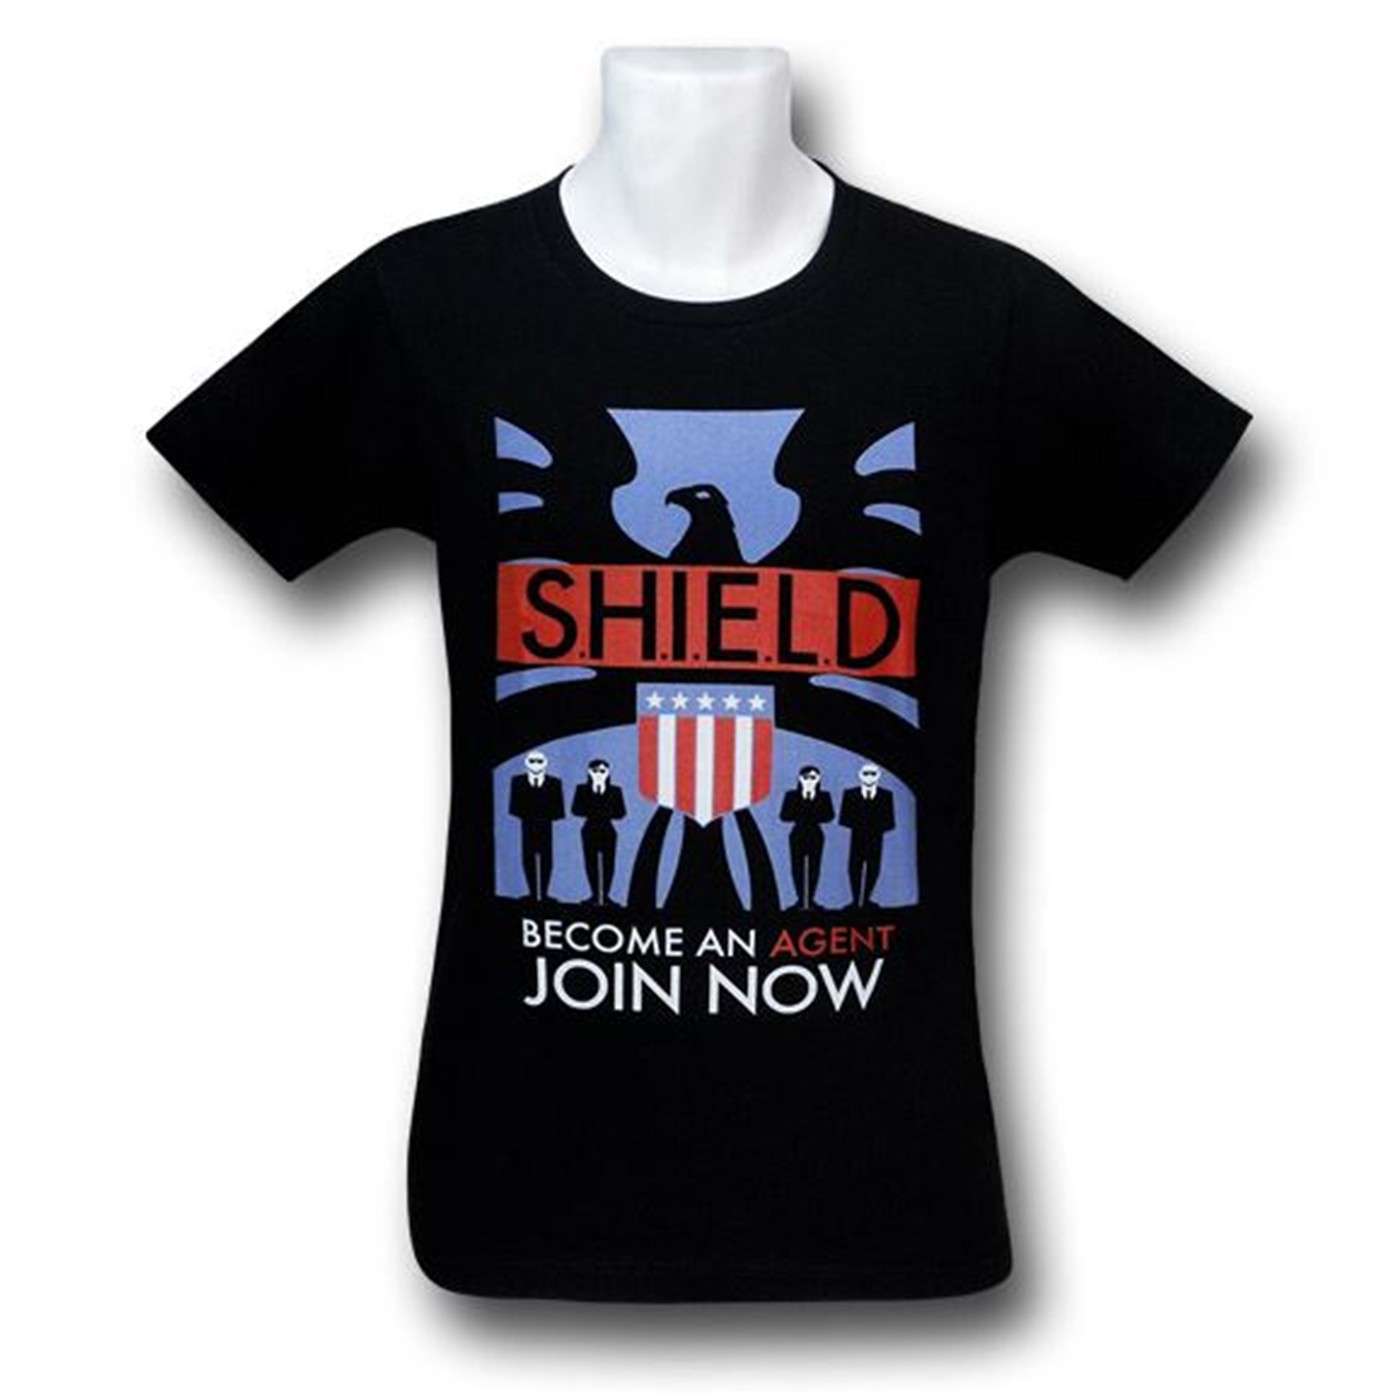 SHIELD Join Now 30 Single T-Shirt